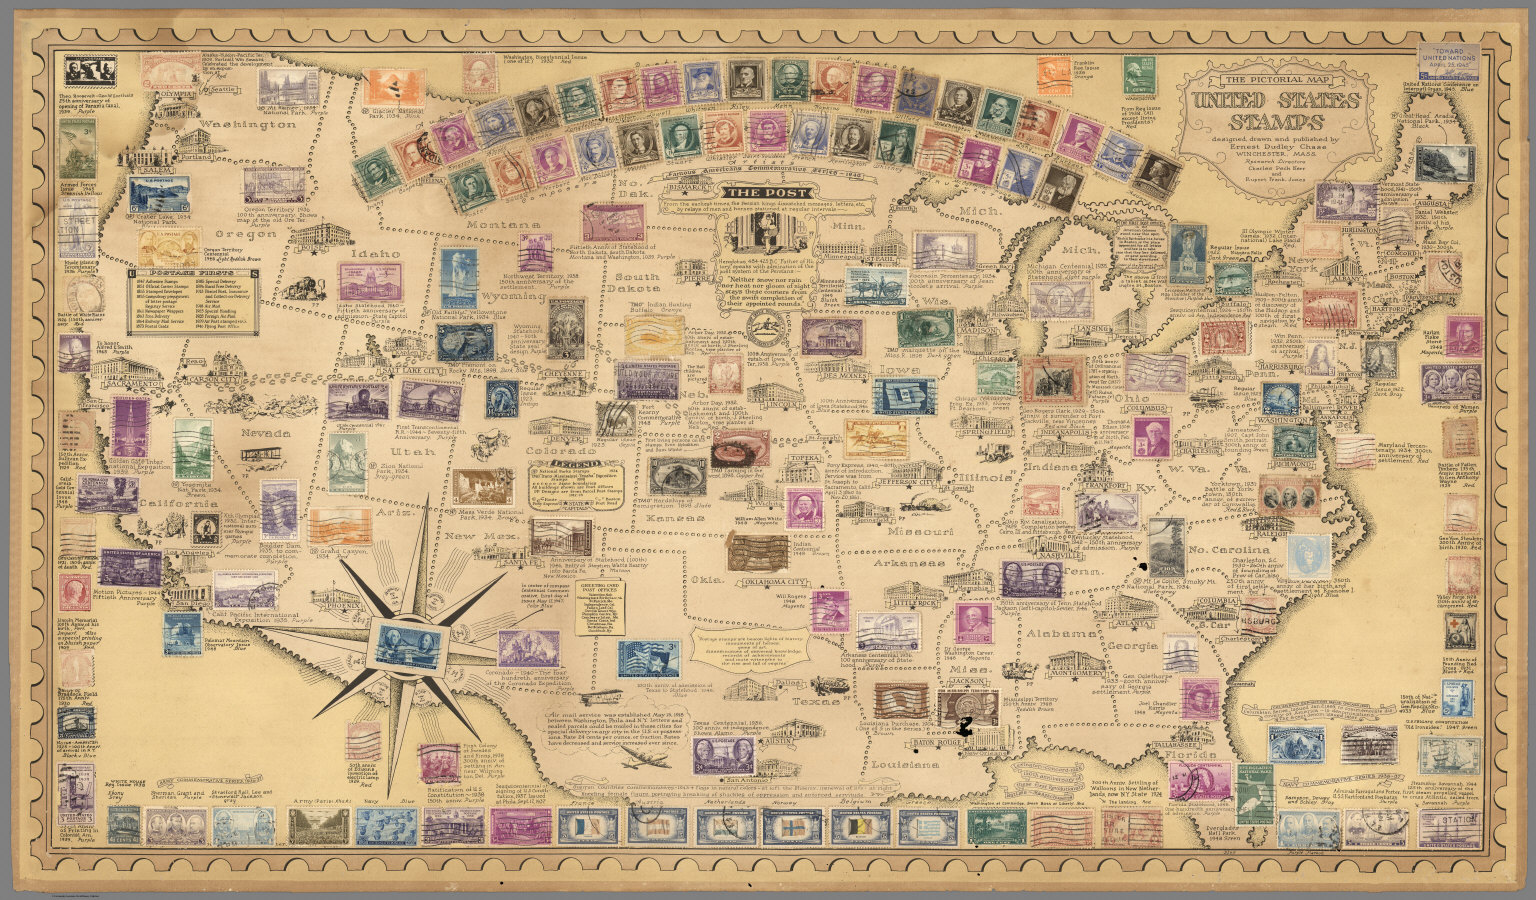 The Pictorial Map United States Stamps David Rumsey Historical Map